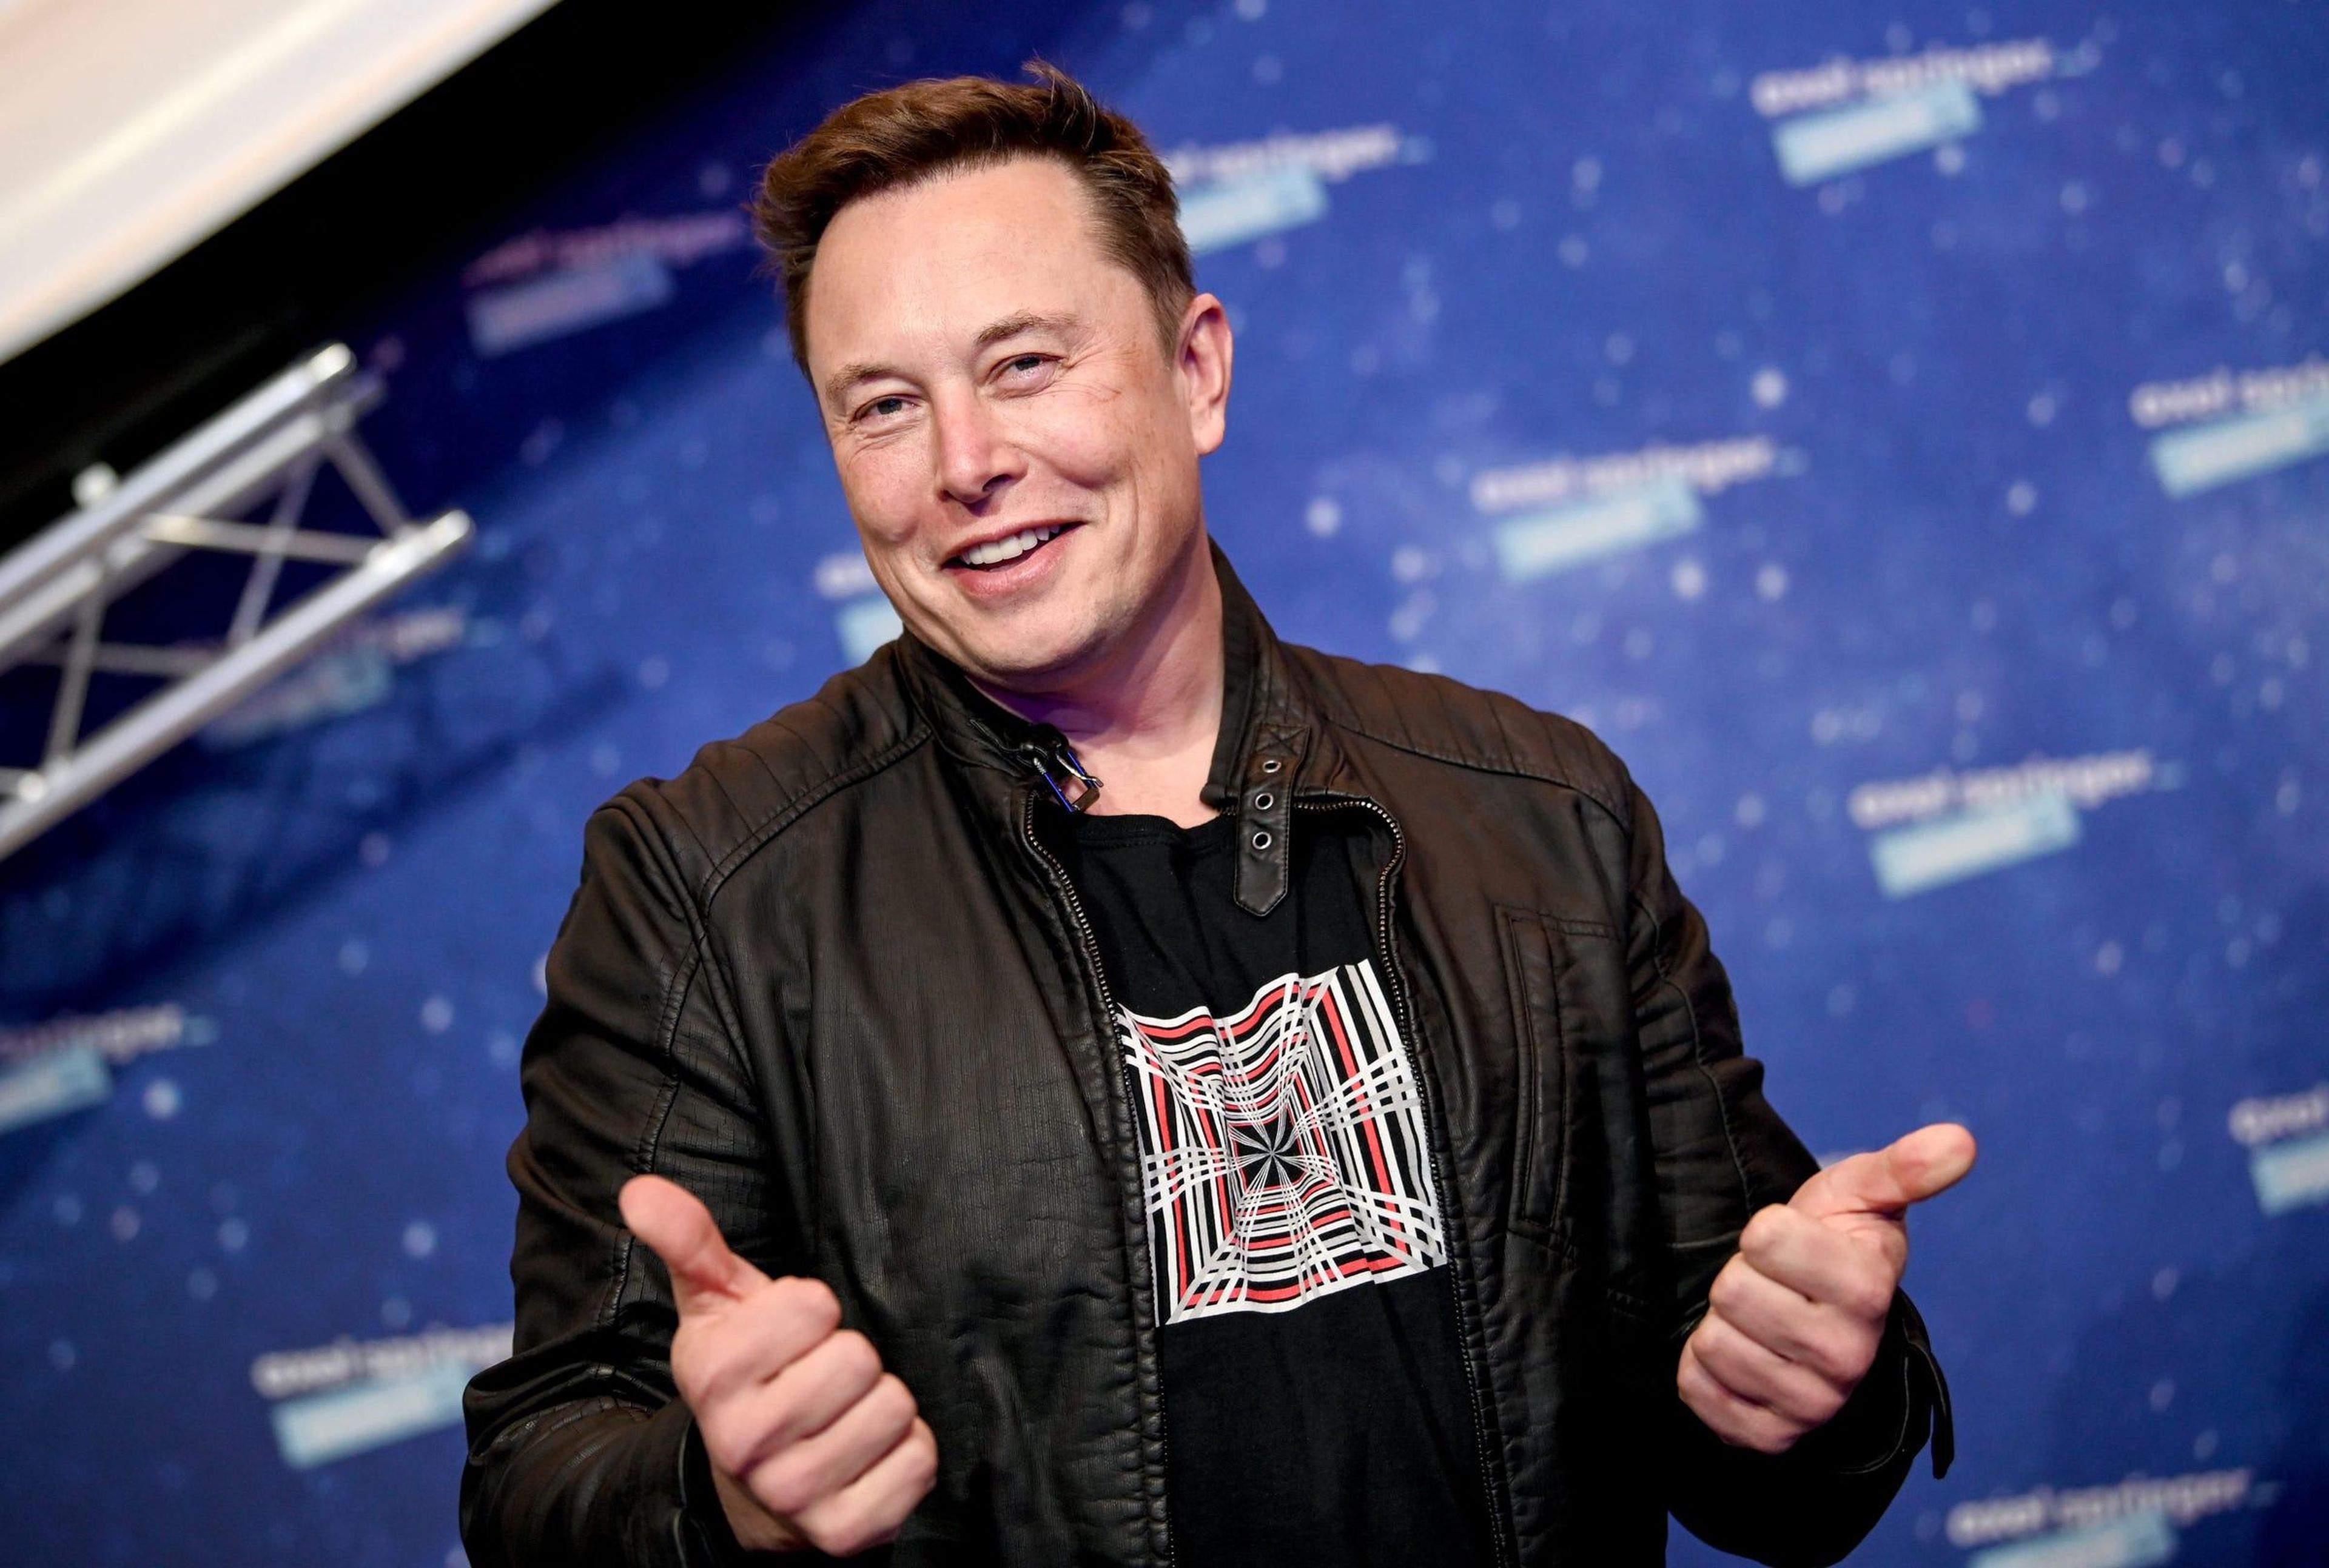 SpaceX owner and Tesla CEO Elon Musk.